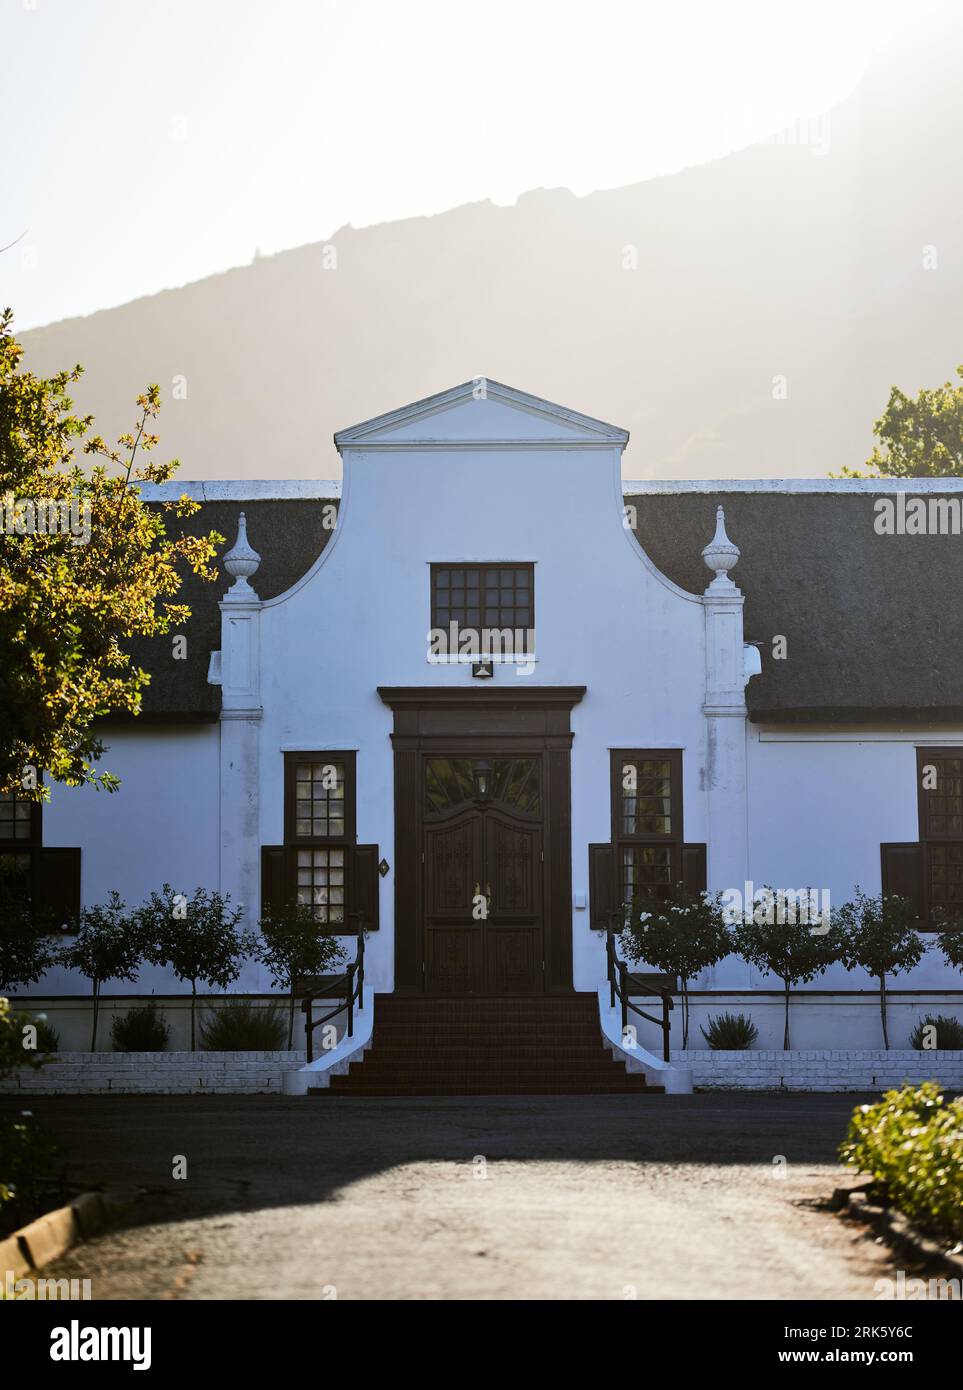 The facade of pastors' house in Paarl, South Africa. Stock Photo